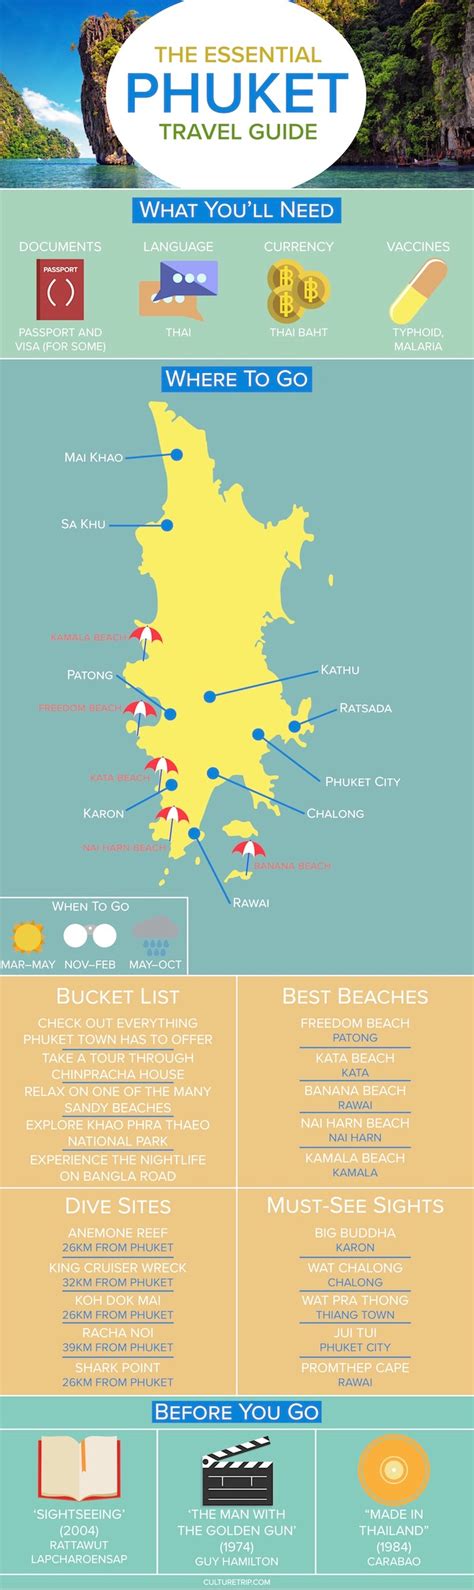 Watch the video explanation about classic wow: The Essential Travel Guide to Phuket (Infographic)